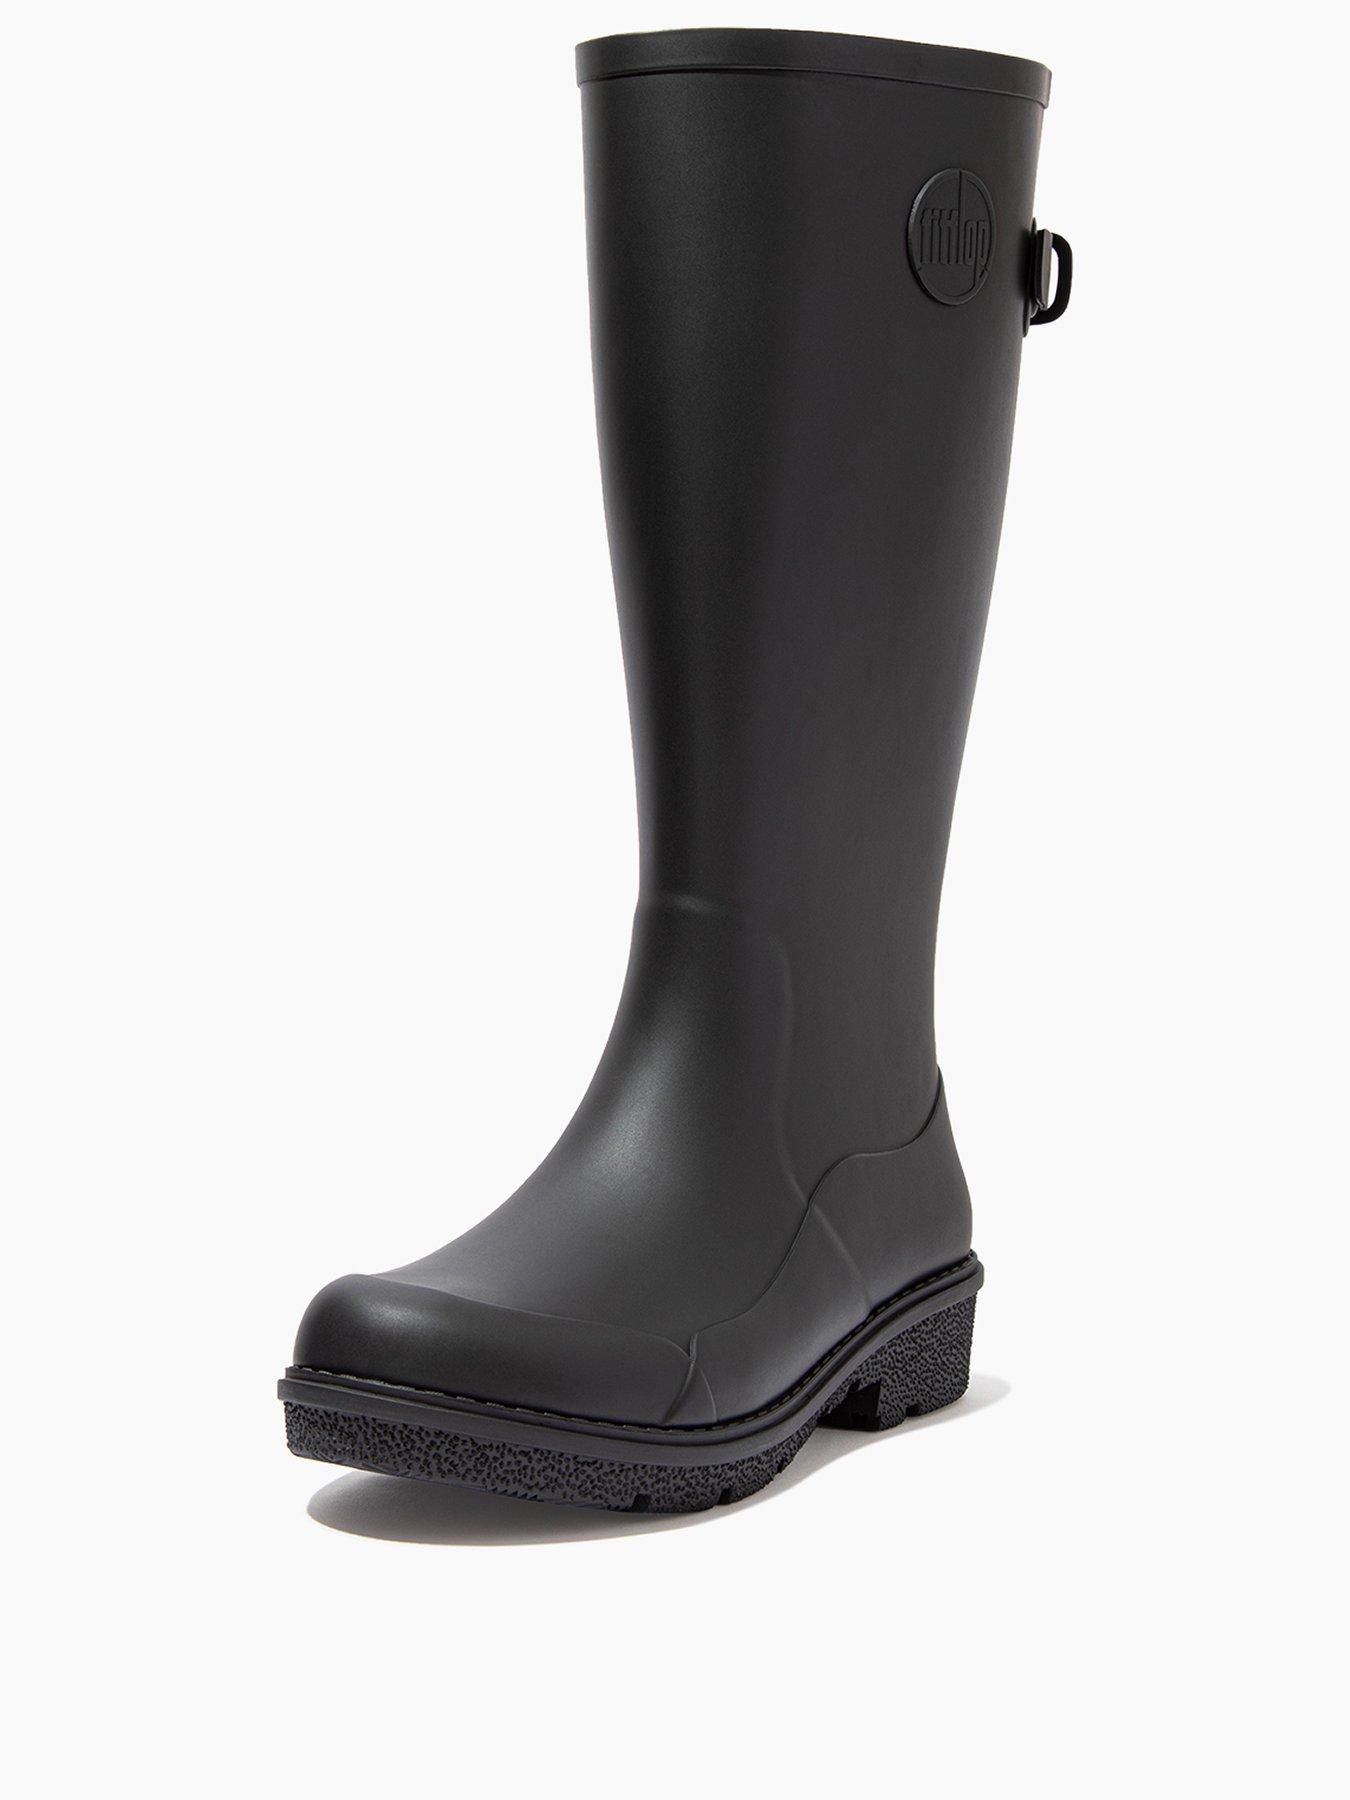 Shoes & boots Wonderwelly Tall Wellington Boots - Black